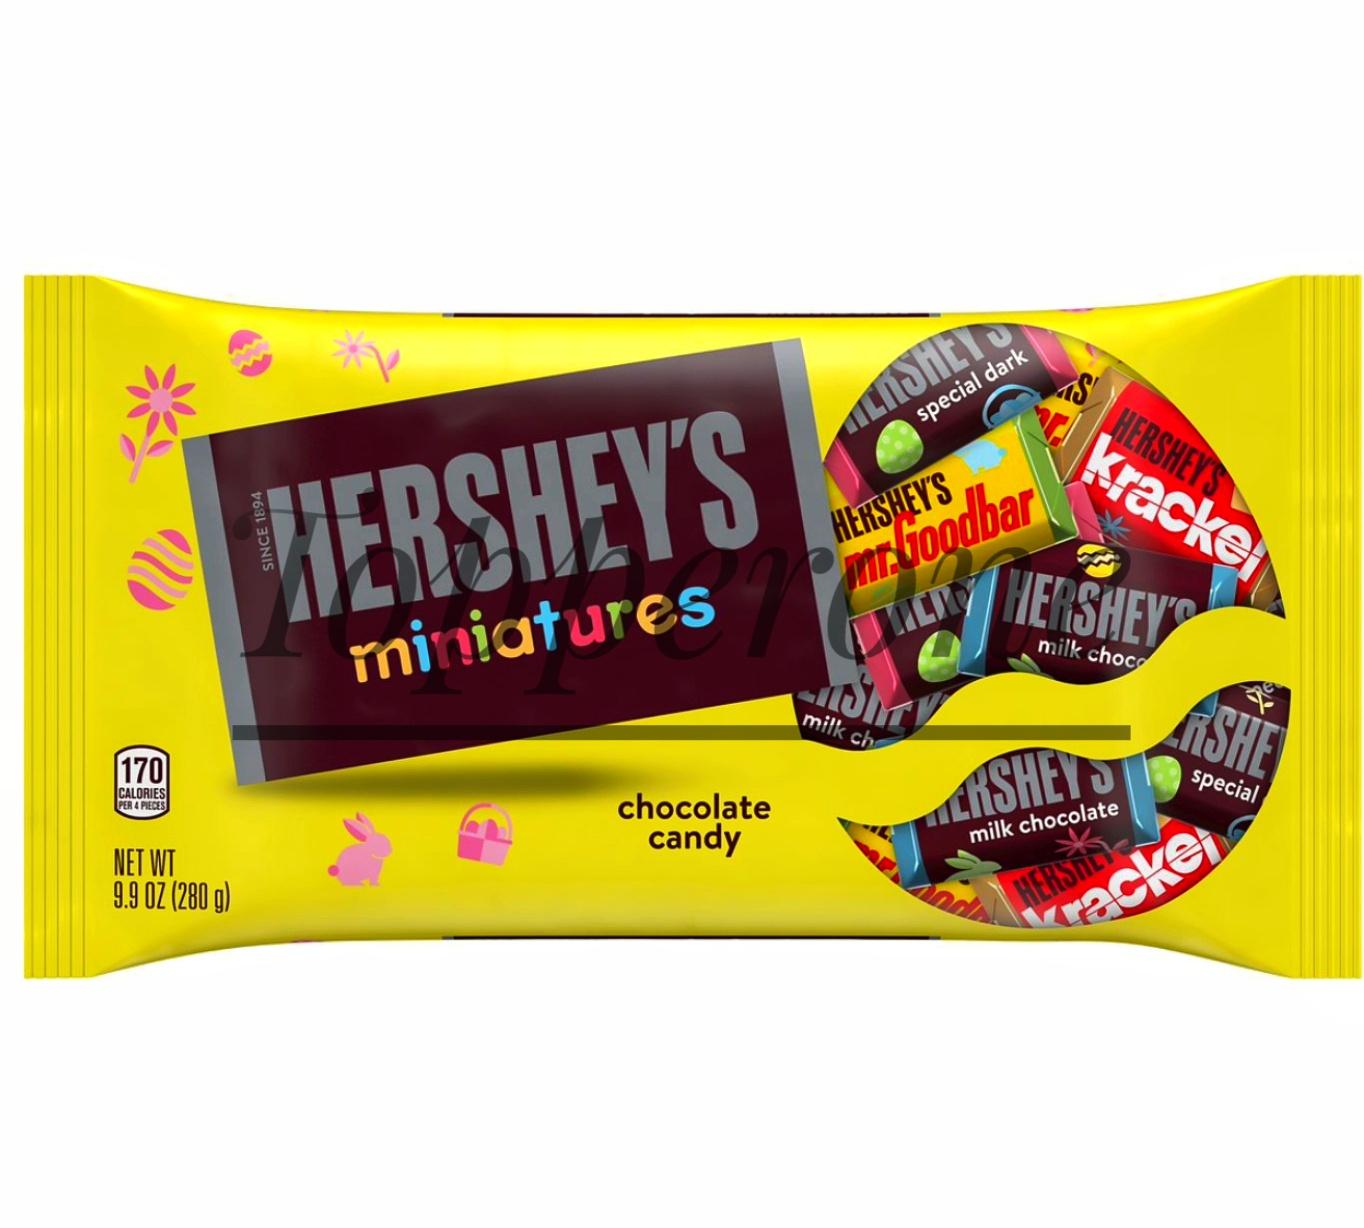 Hershey's Miniatures Chocolate Candy 280gm with Yellow color packet